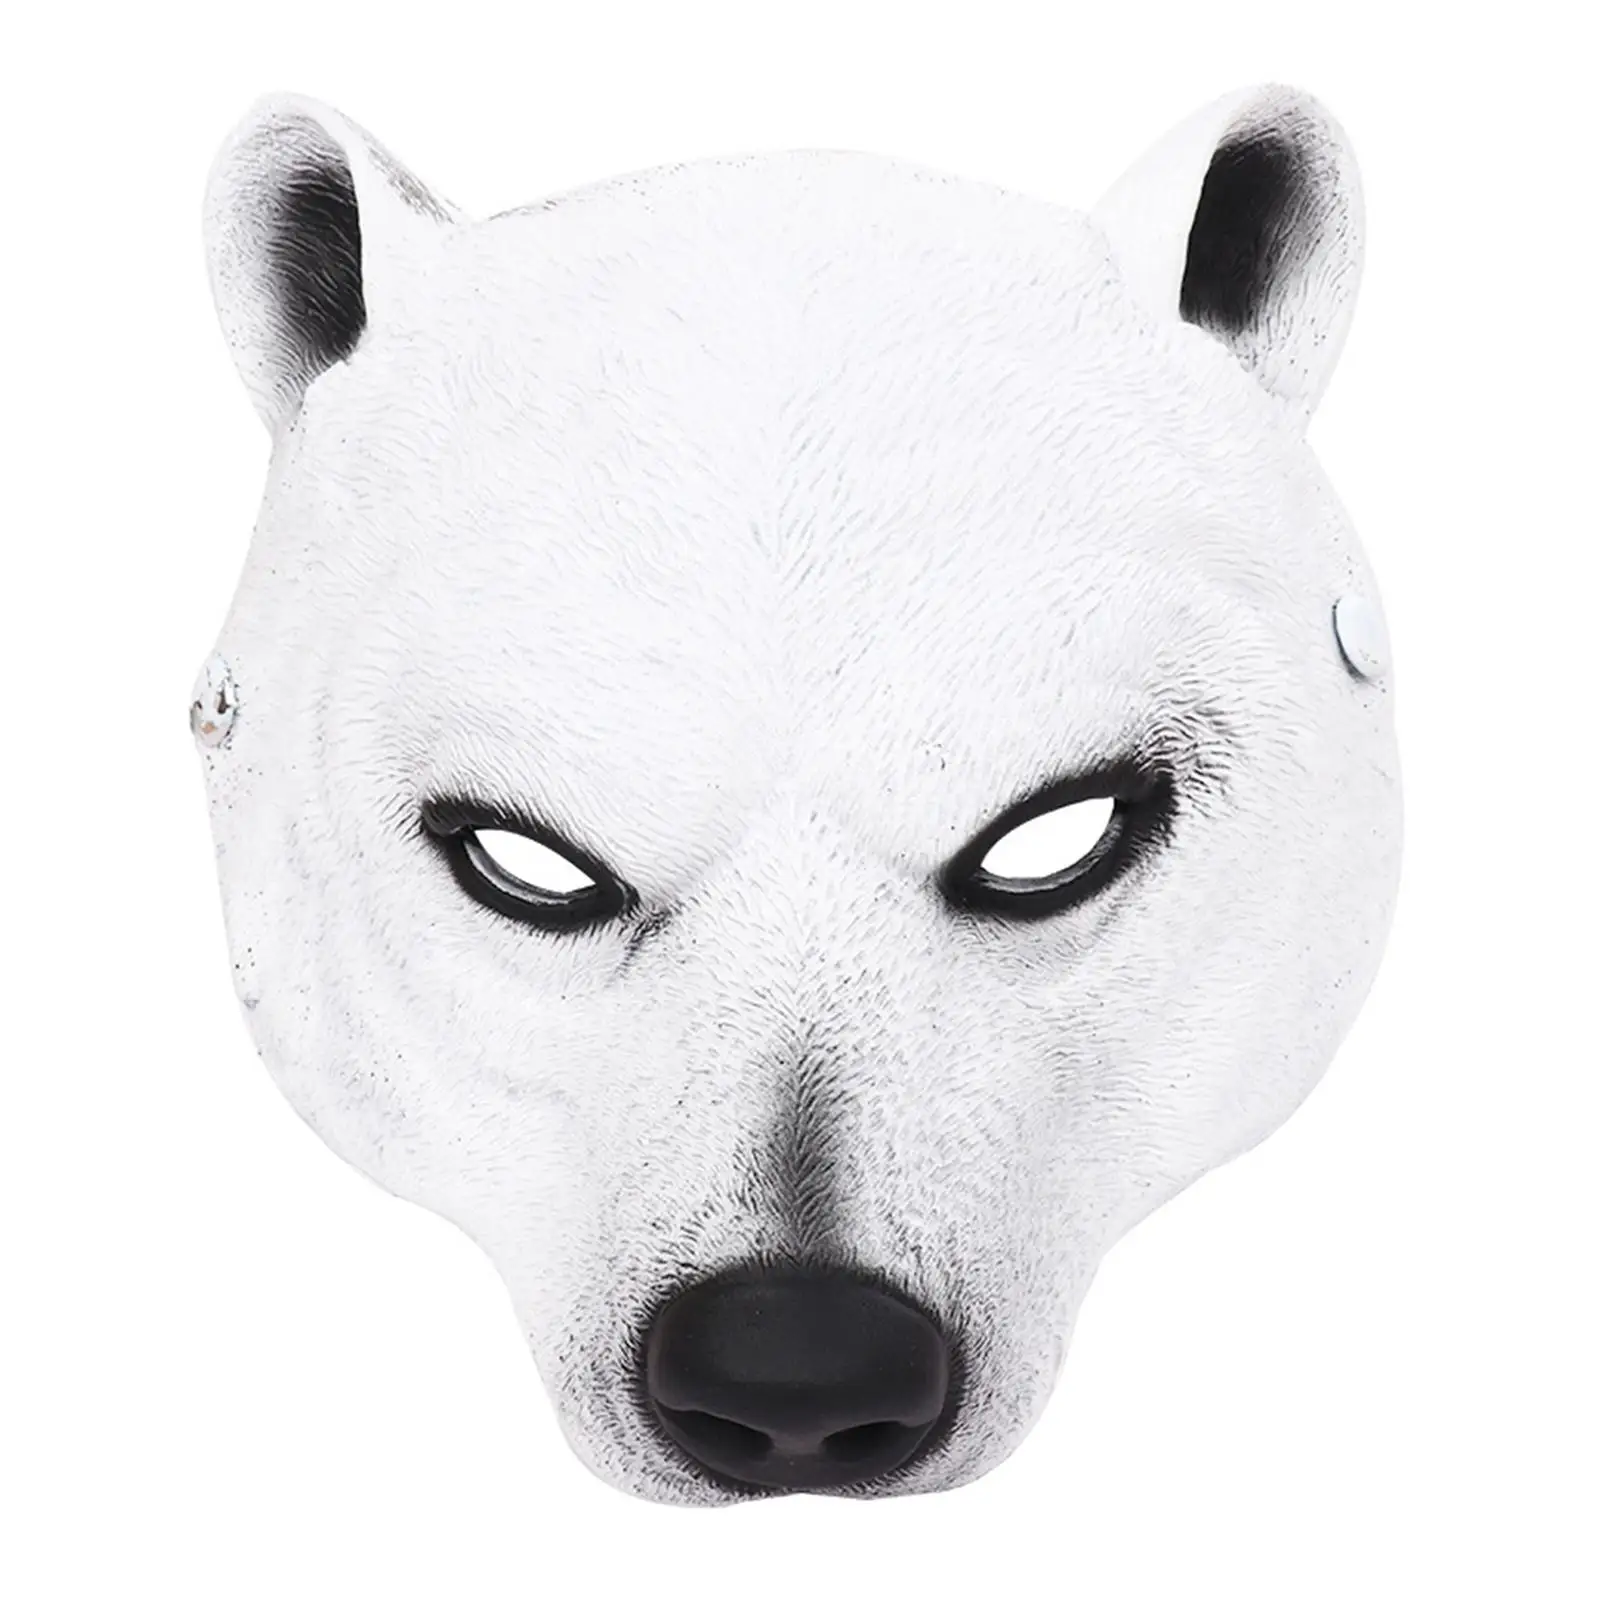 3D Halloween Polar Bear Mask Lightweight Facial Cover Novelty Realistic Half Face Mask for Festival Decor Cosplay Party Costume